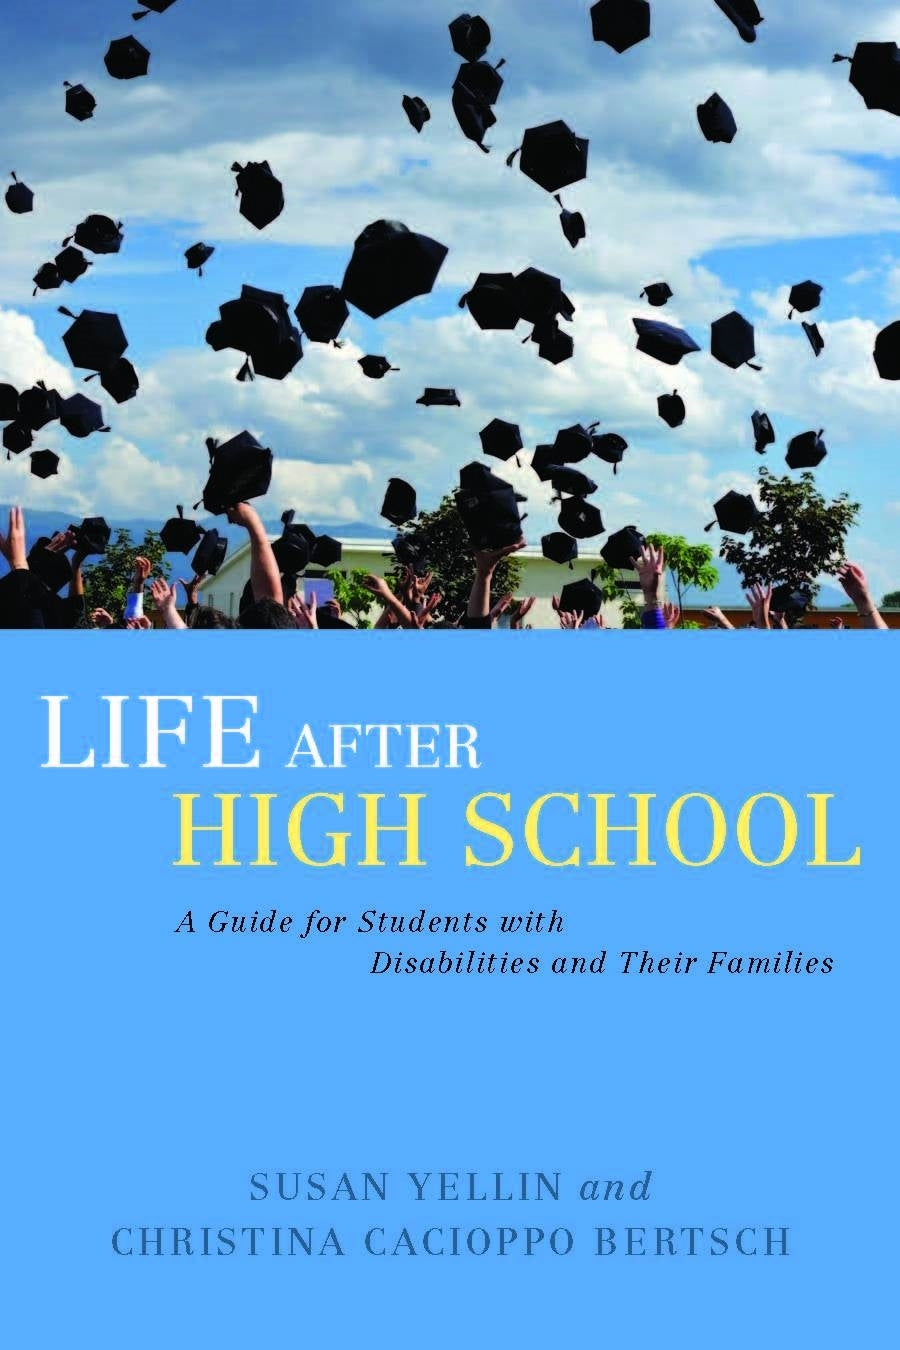 Life After High School by Susan Yellin, Christina Cacioppo Bertsch